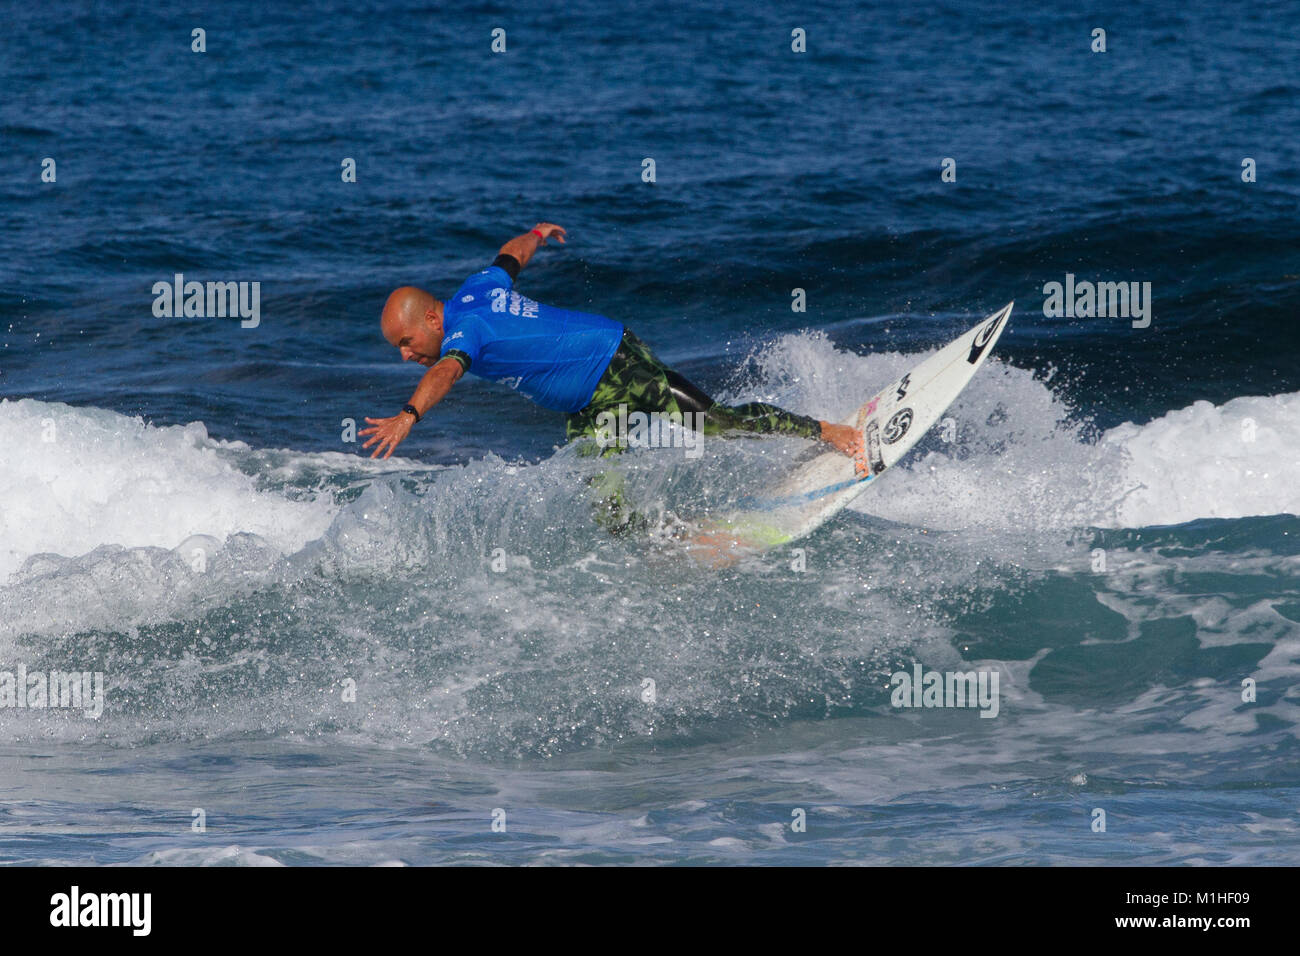 Arona, Spain. 30th Jan, 2018. First day off the Las Americas Pro surfing for the World ChampionsLeague with participants off many countries from sudafrica, brasil europe Credit: Mercedes Menendez/Pacific Press/Alamy Live News Stock Photo